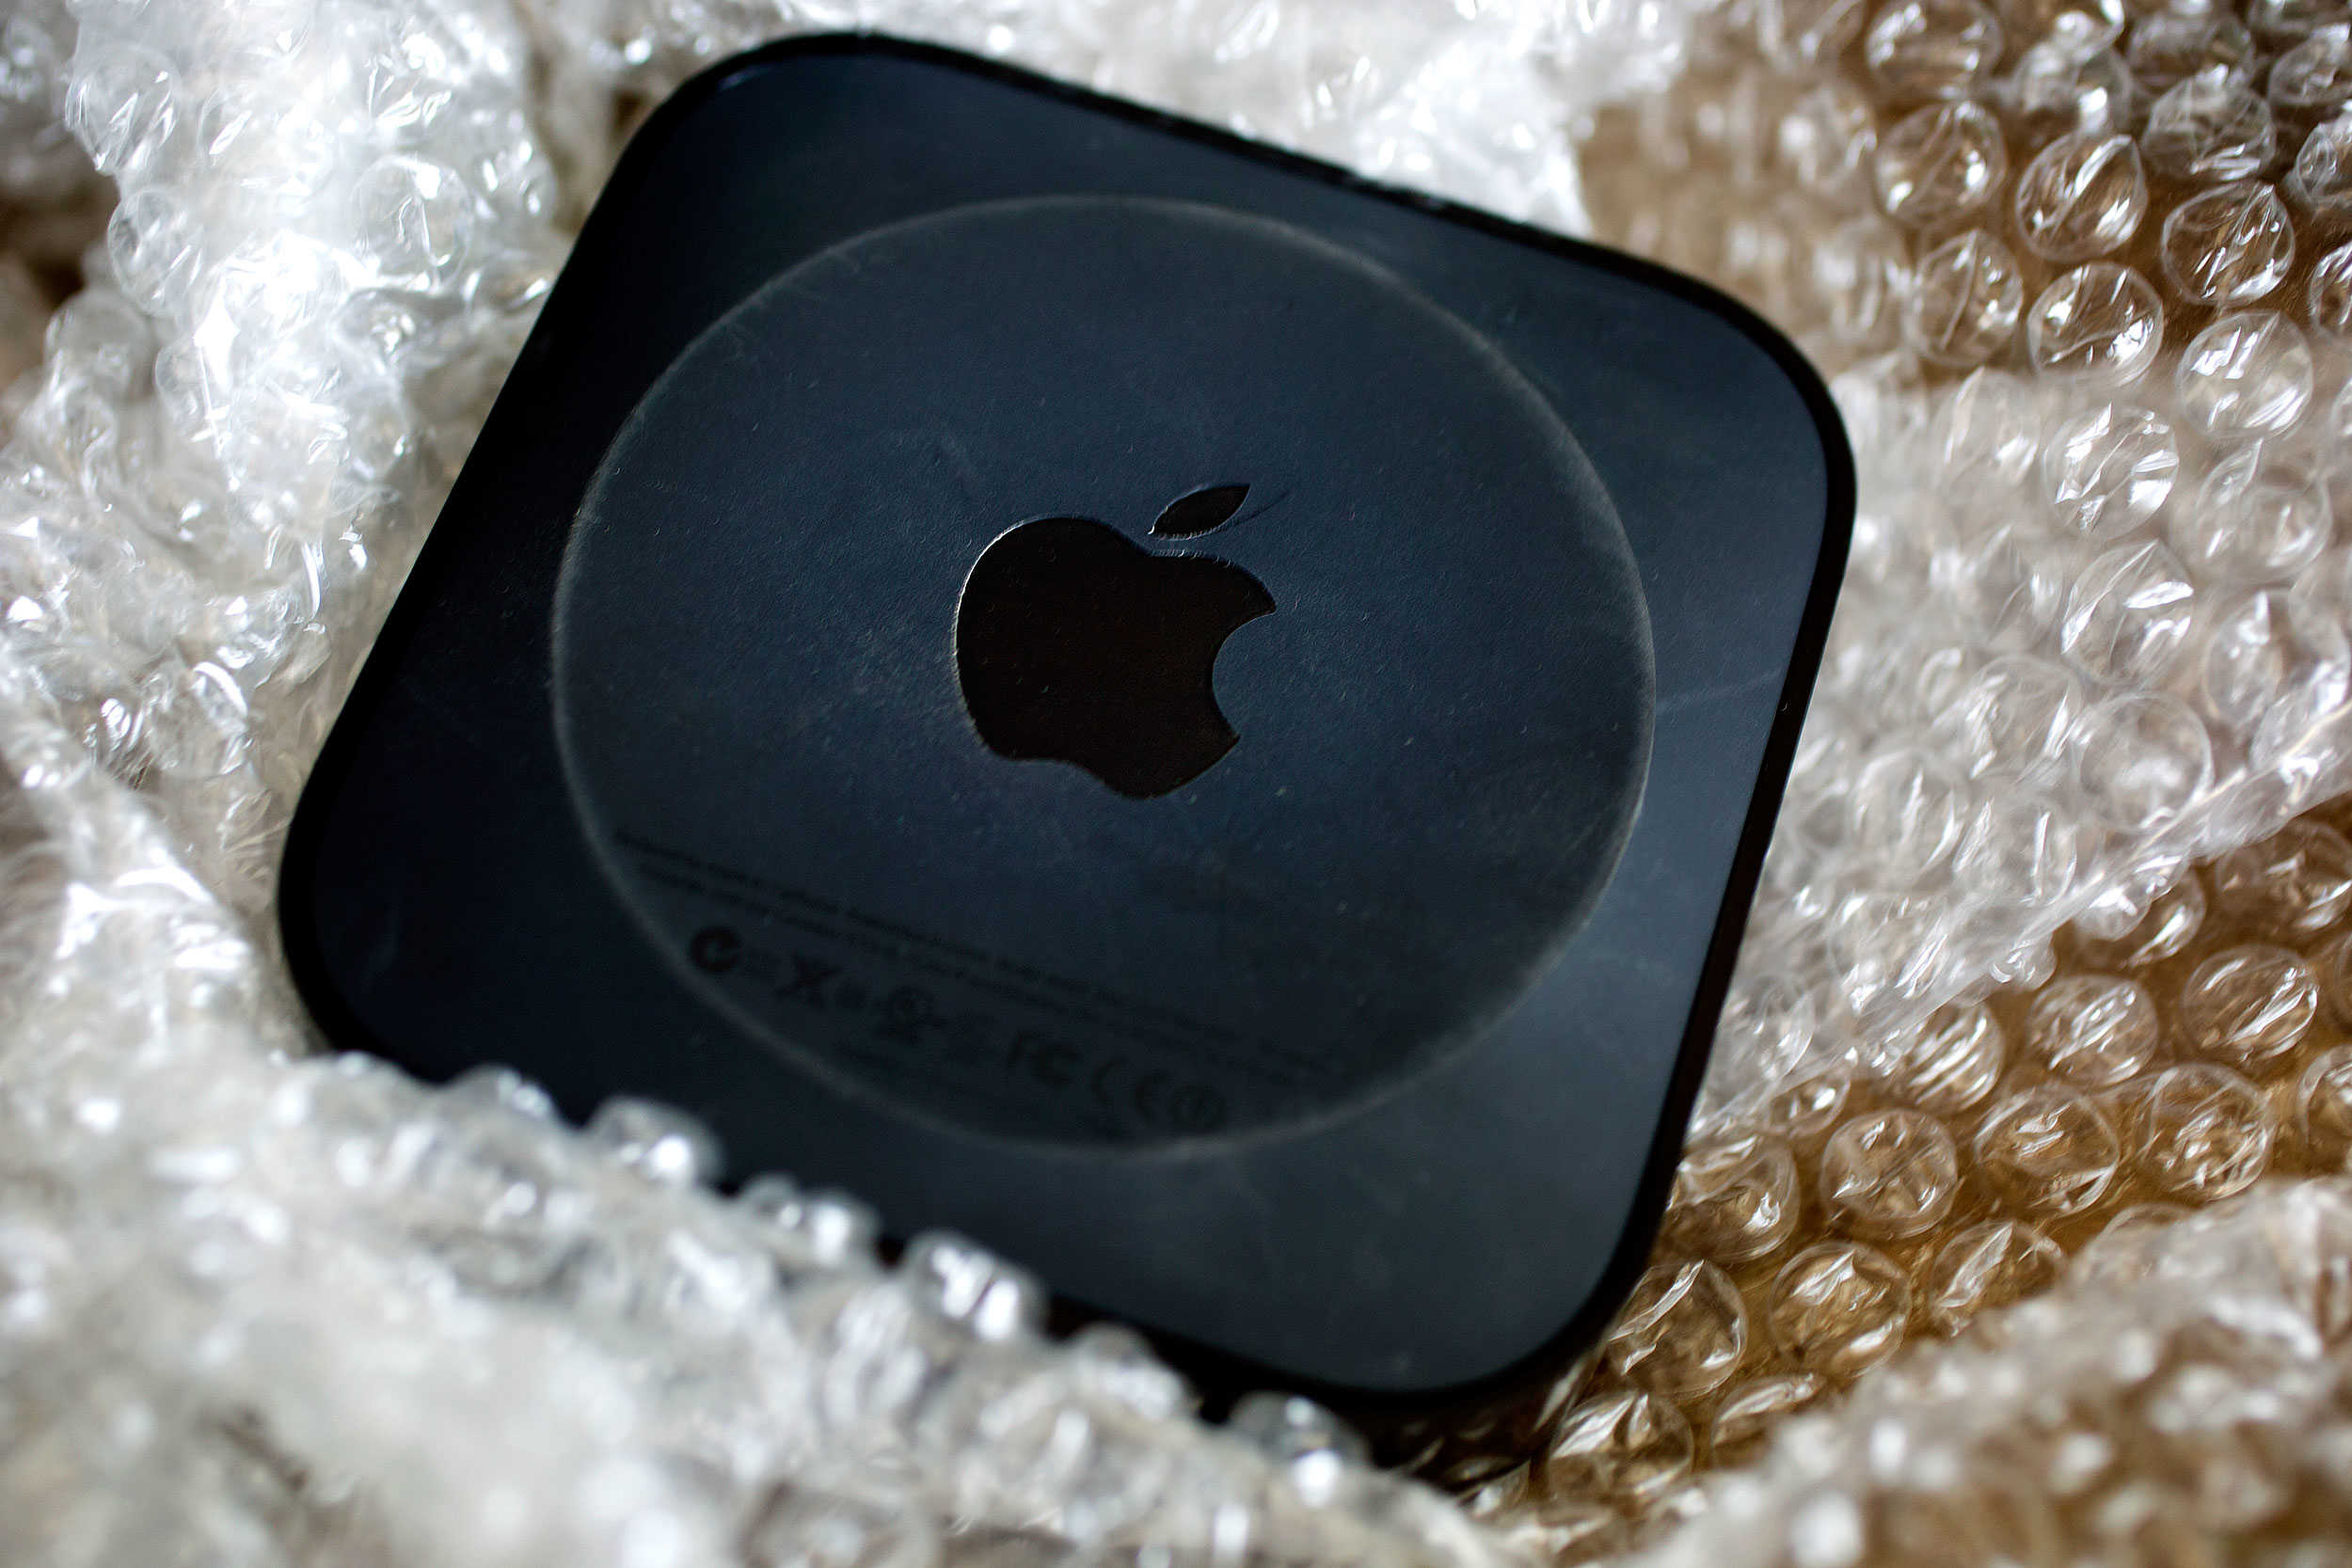 The new Apple TV is about to be unveiled.